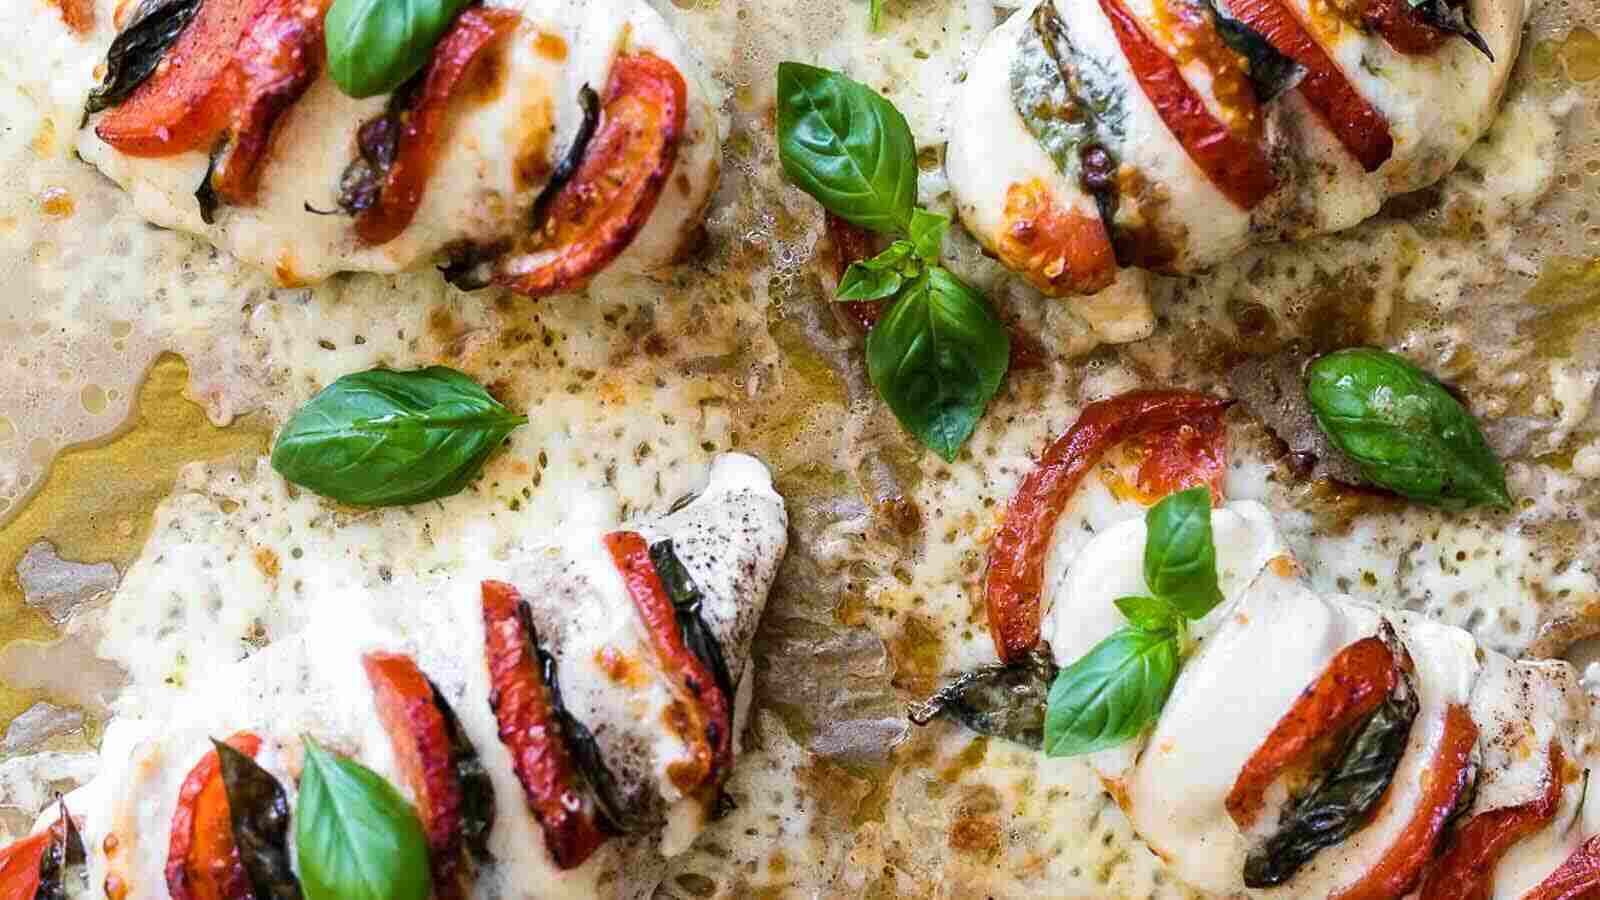 Stuffed Caprese Chicken Hasselback. Photo credit: Low Carb – No Carb.